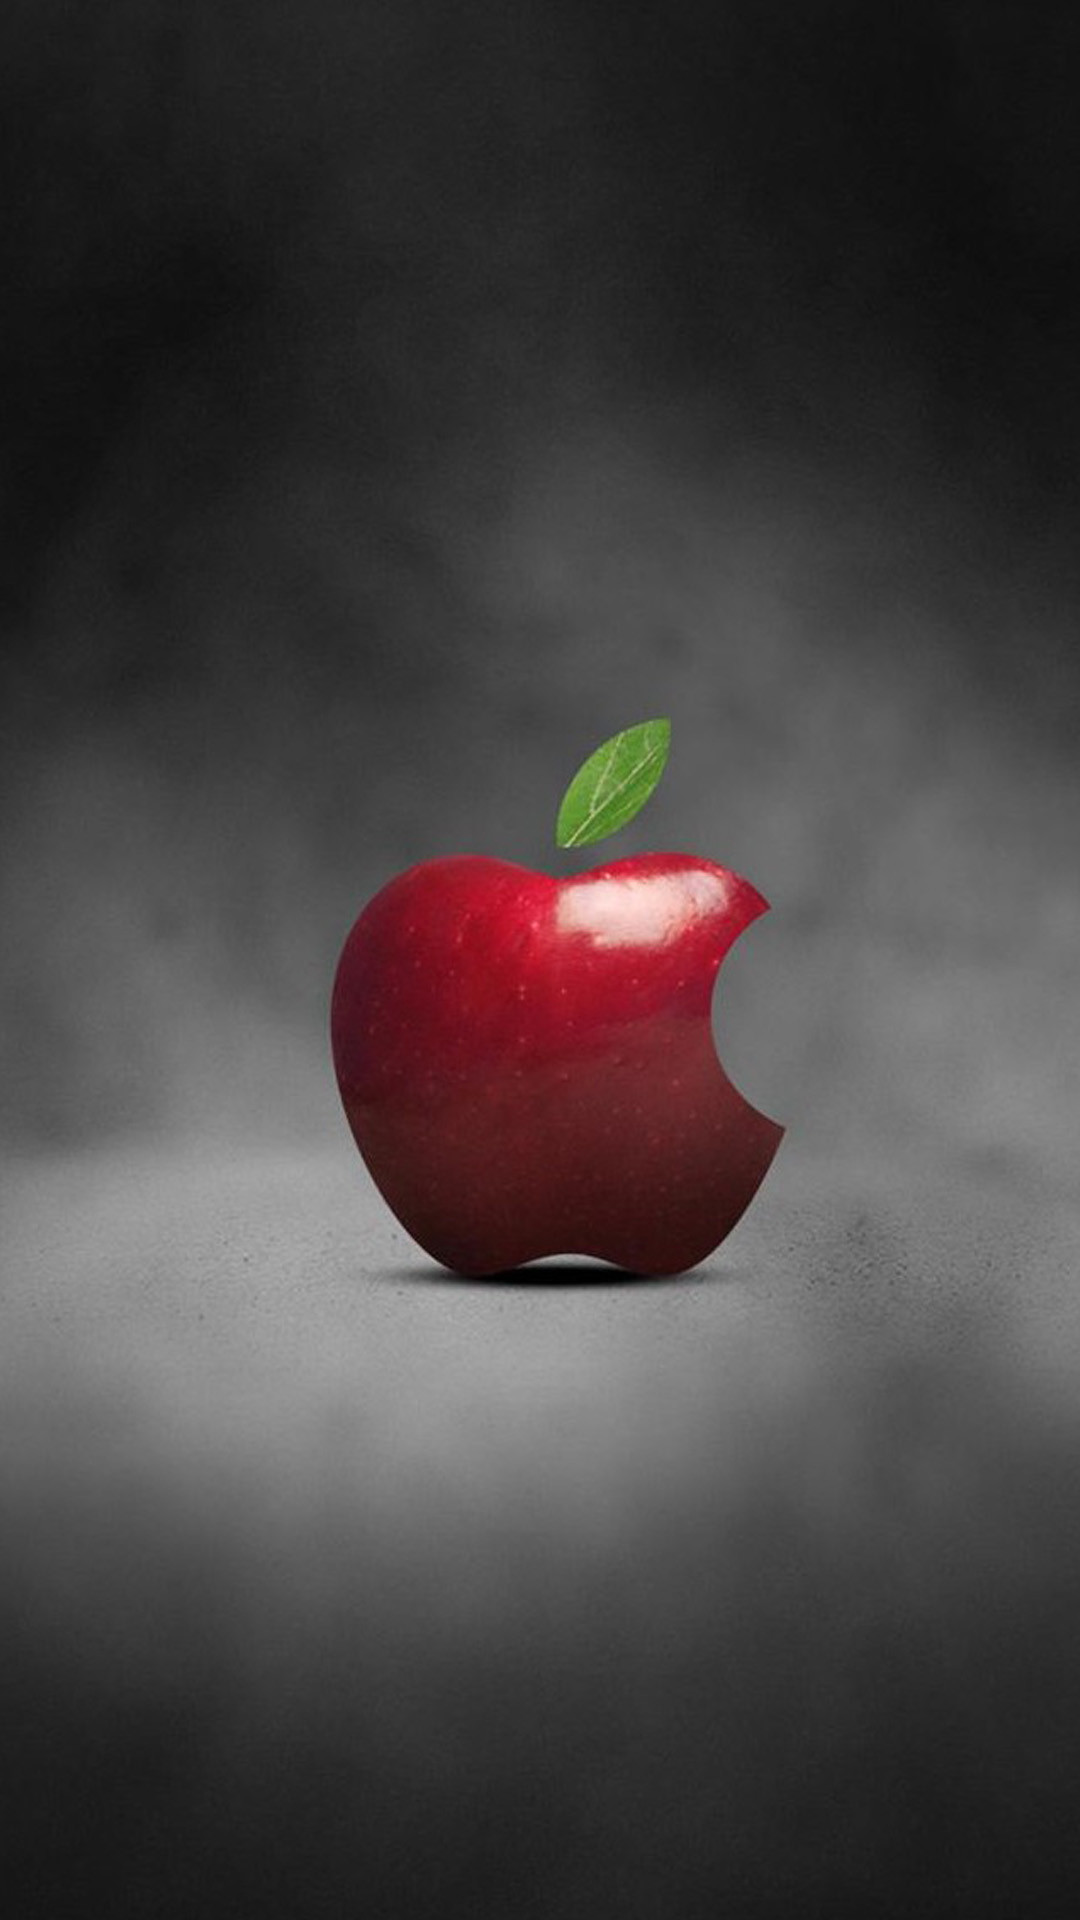 Red Apple Wallpaper for iPhone 11, Pro Max, X, 8, 7, 6 - Free Download on  3Wallpapers | Apple wallpaper, Apple logo wallpaper, Apple logo wallpaper  iphone